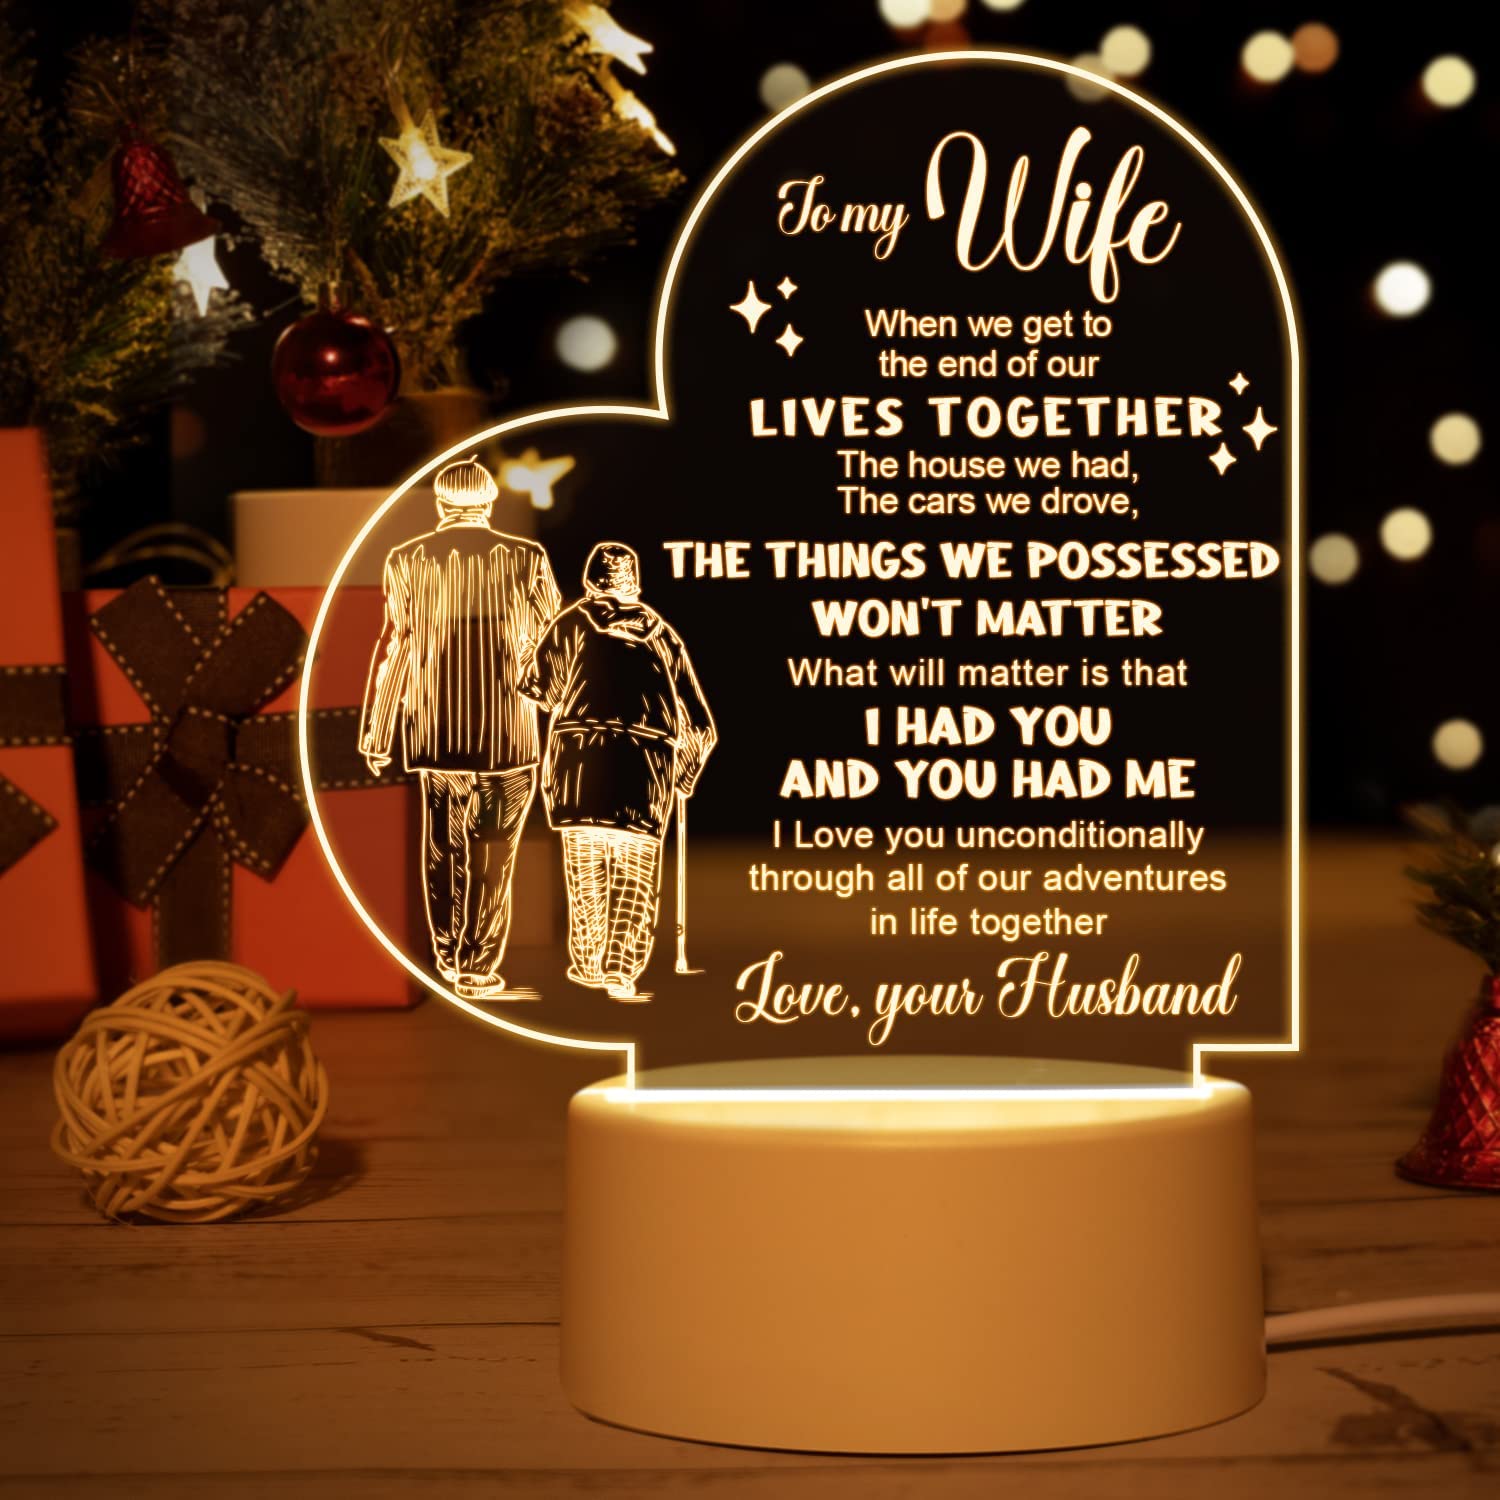 Coldbling Gifts for Wife Birthday Gifts Ideas, Acrylic Engraved Night Light  for Wife, Anniversary Birthday Gift from Husband, Christmas Gift